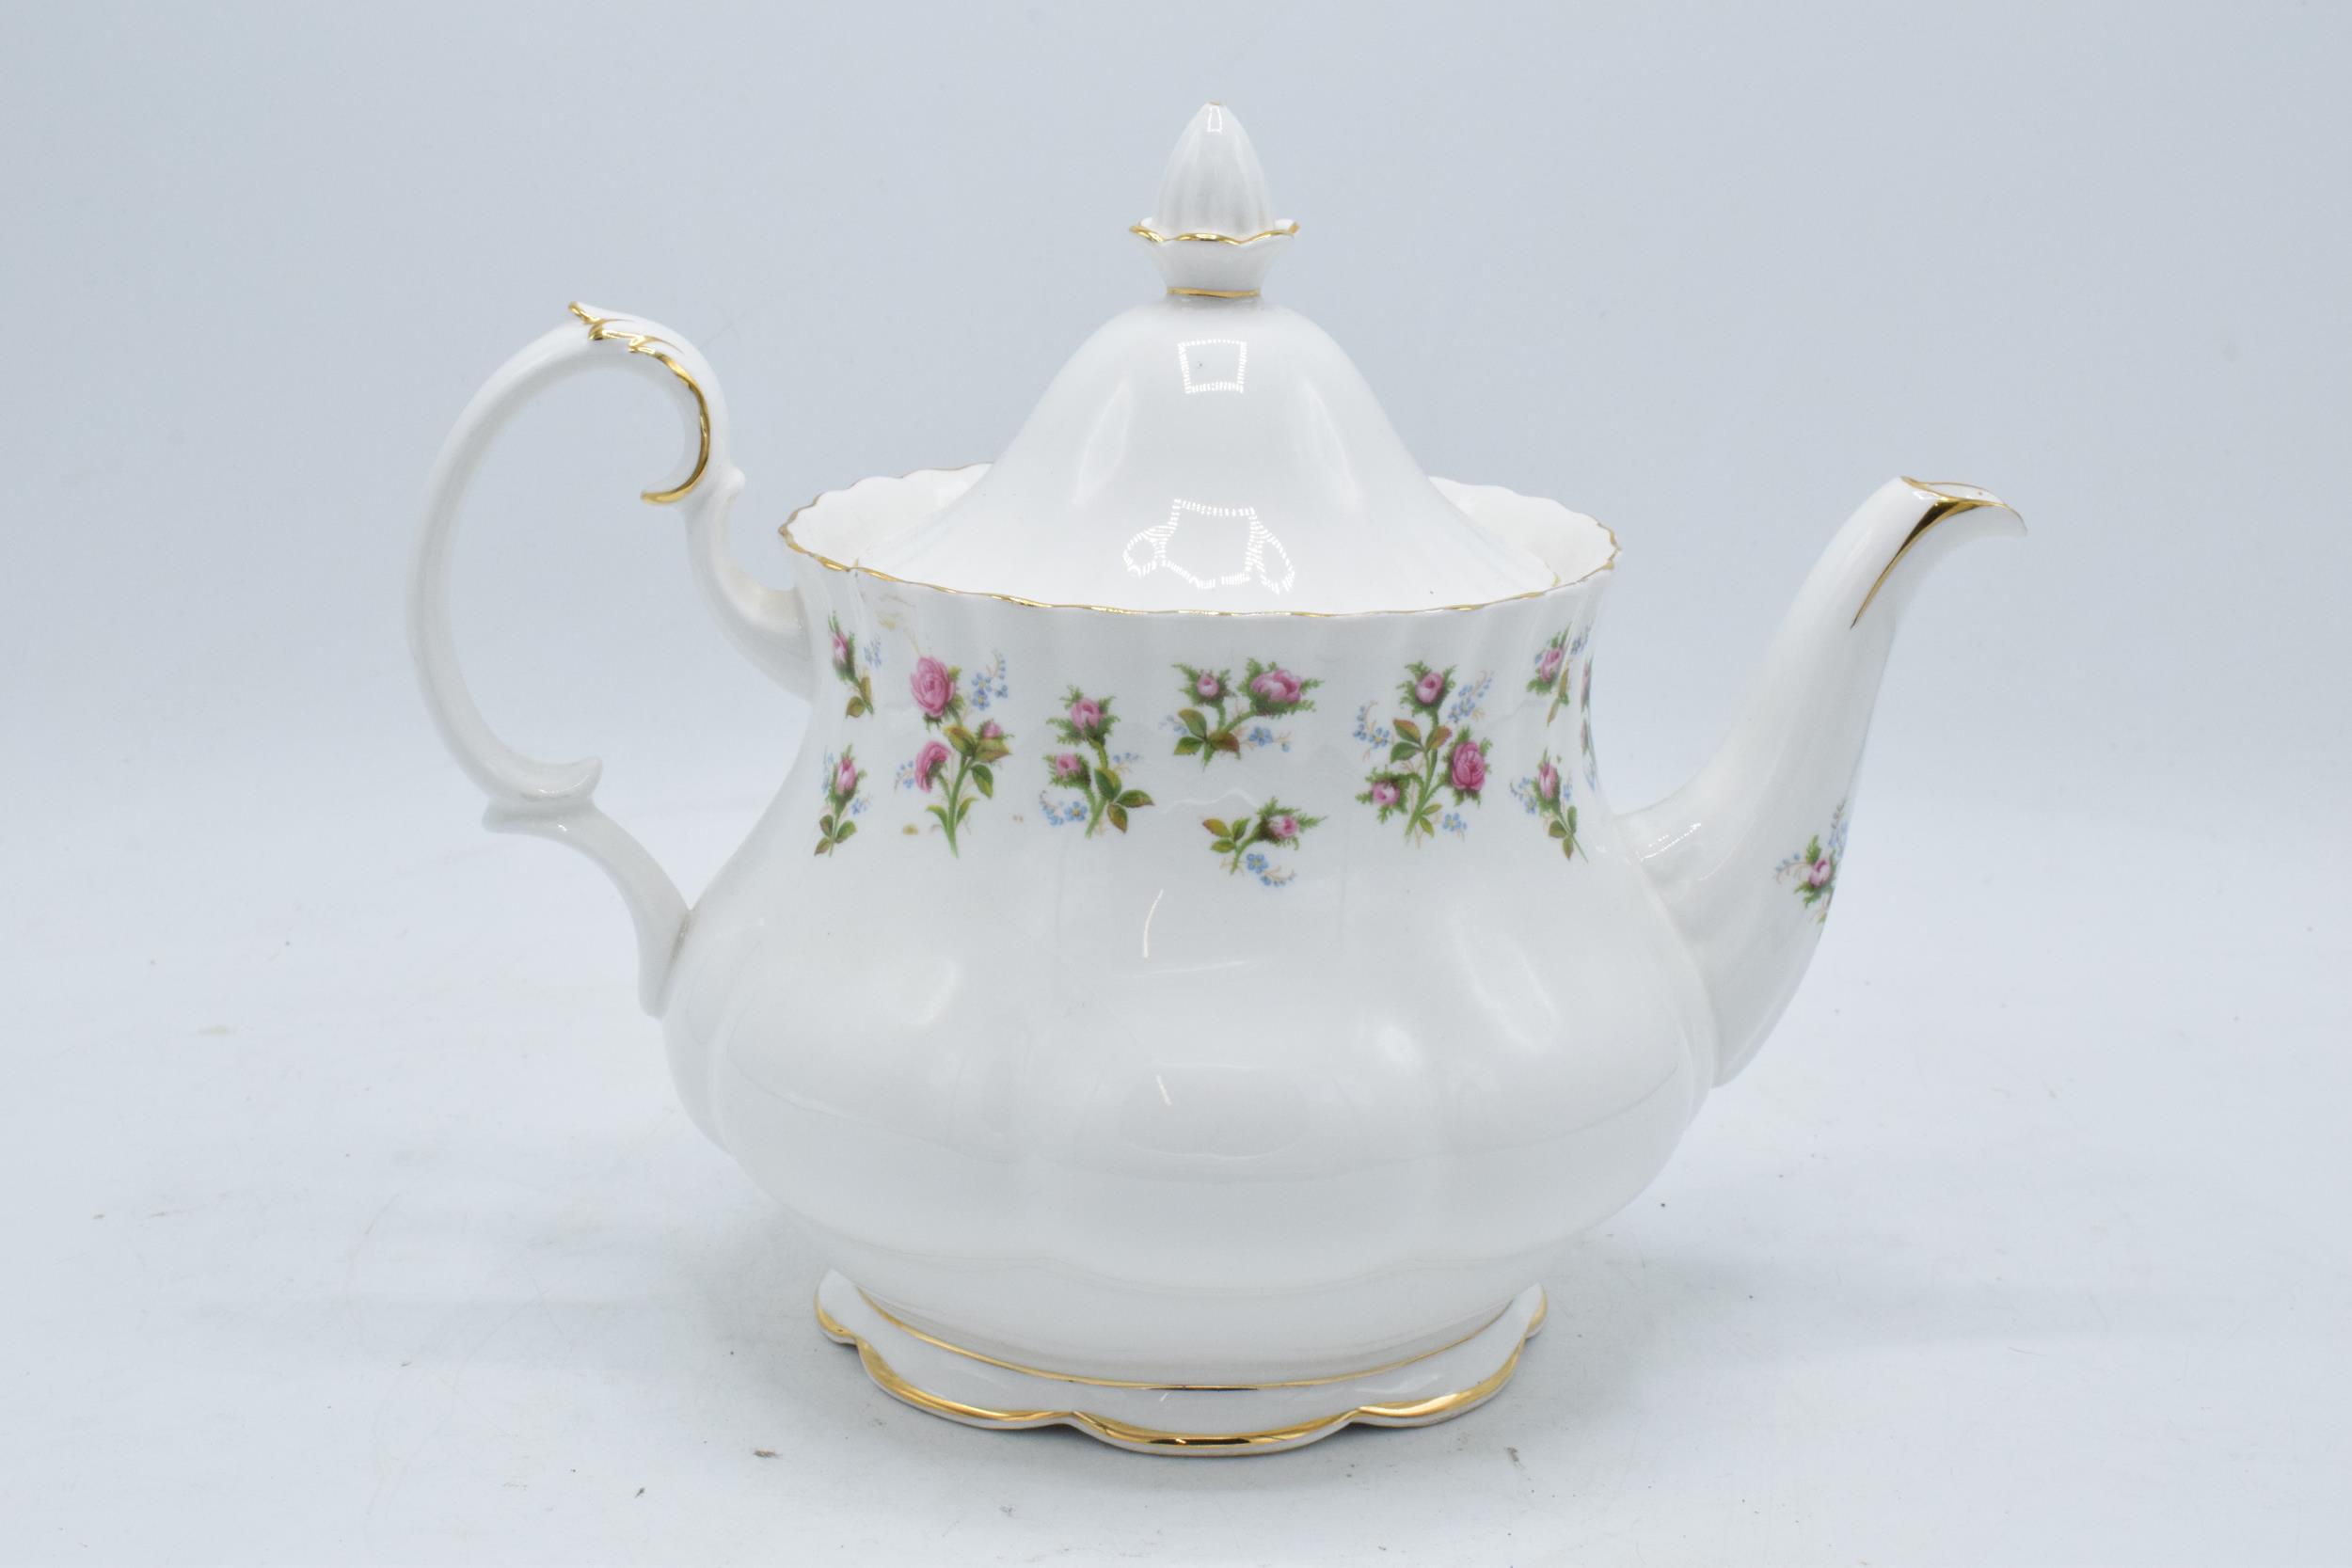 Royal Albert large teapot in the Winsome design. In good condition with no obvious damage or - Image 2 of 3